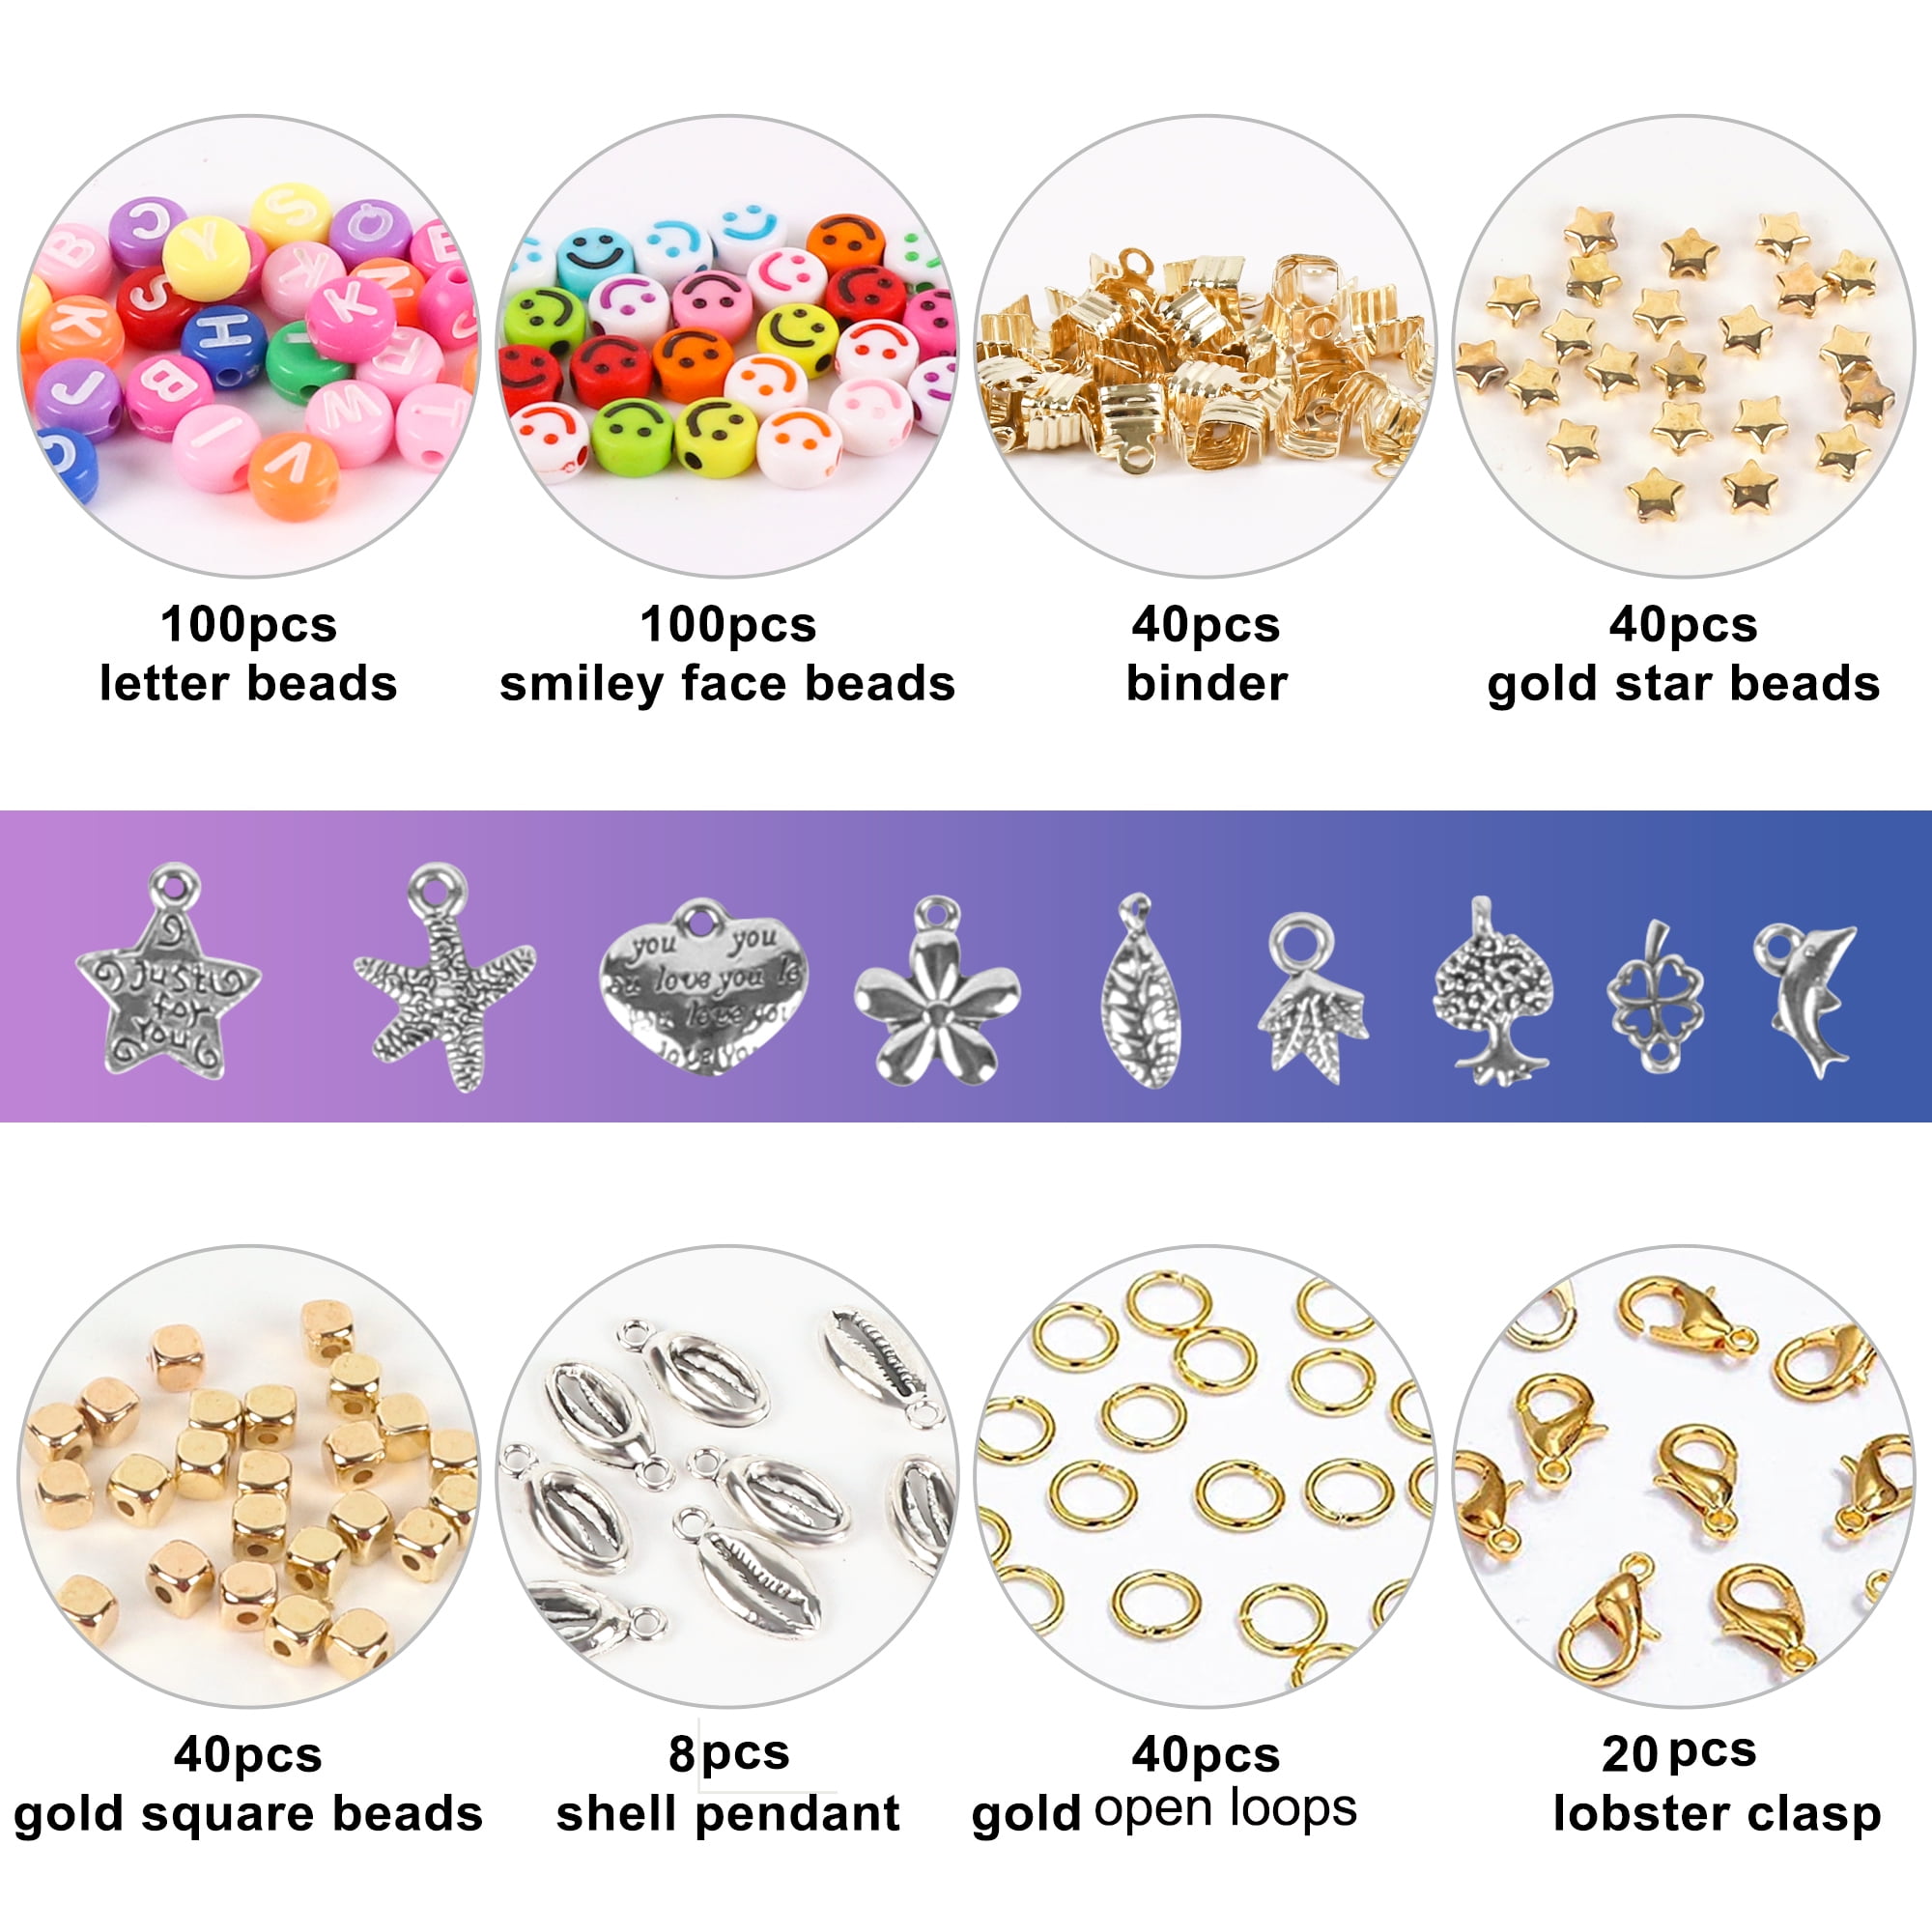  Clay Beads Arts and Crafts Kit for Jewelry Making, With Smiley  Letter Beads, Gifts for Girls Age 6-12